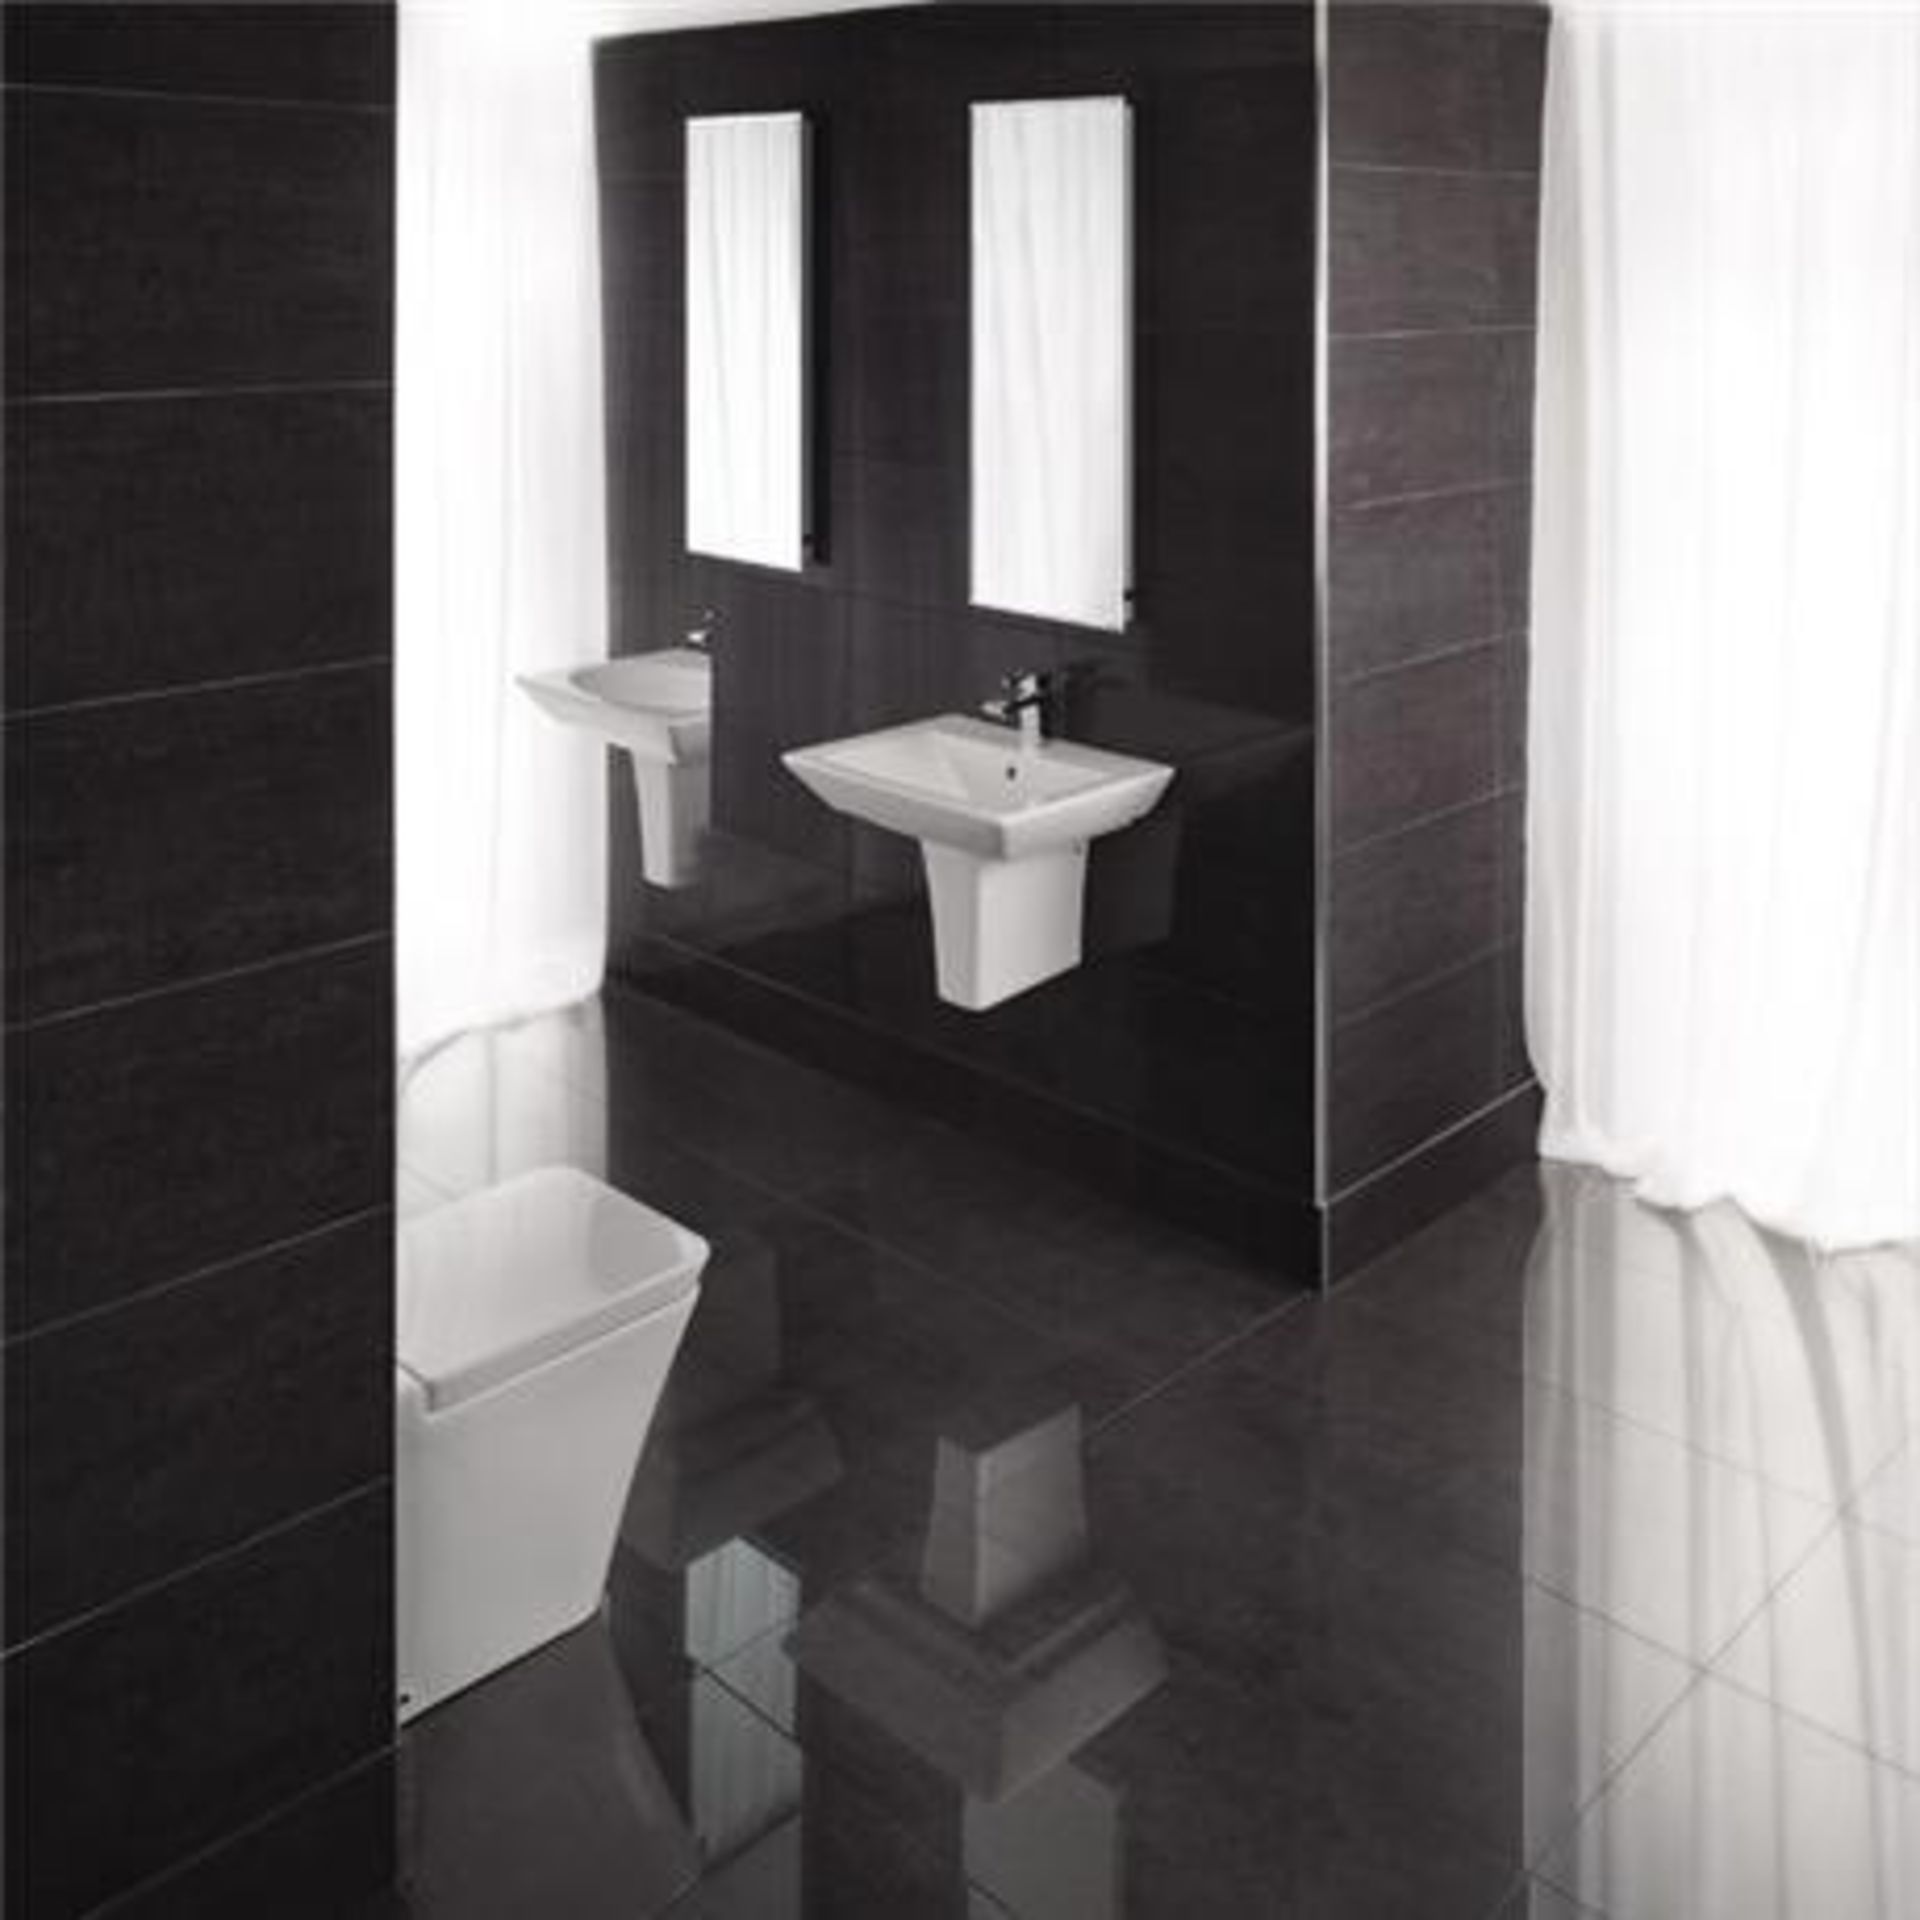 NEW 8.25m2 Milano Garfito Wall and Floor Tiles. 450x450mm per tile, 10mm Thick. Give your bathr...